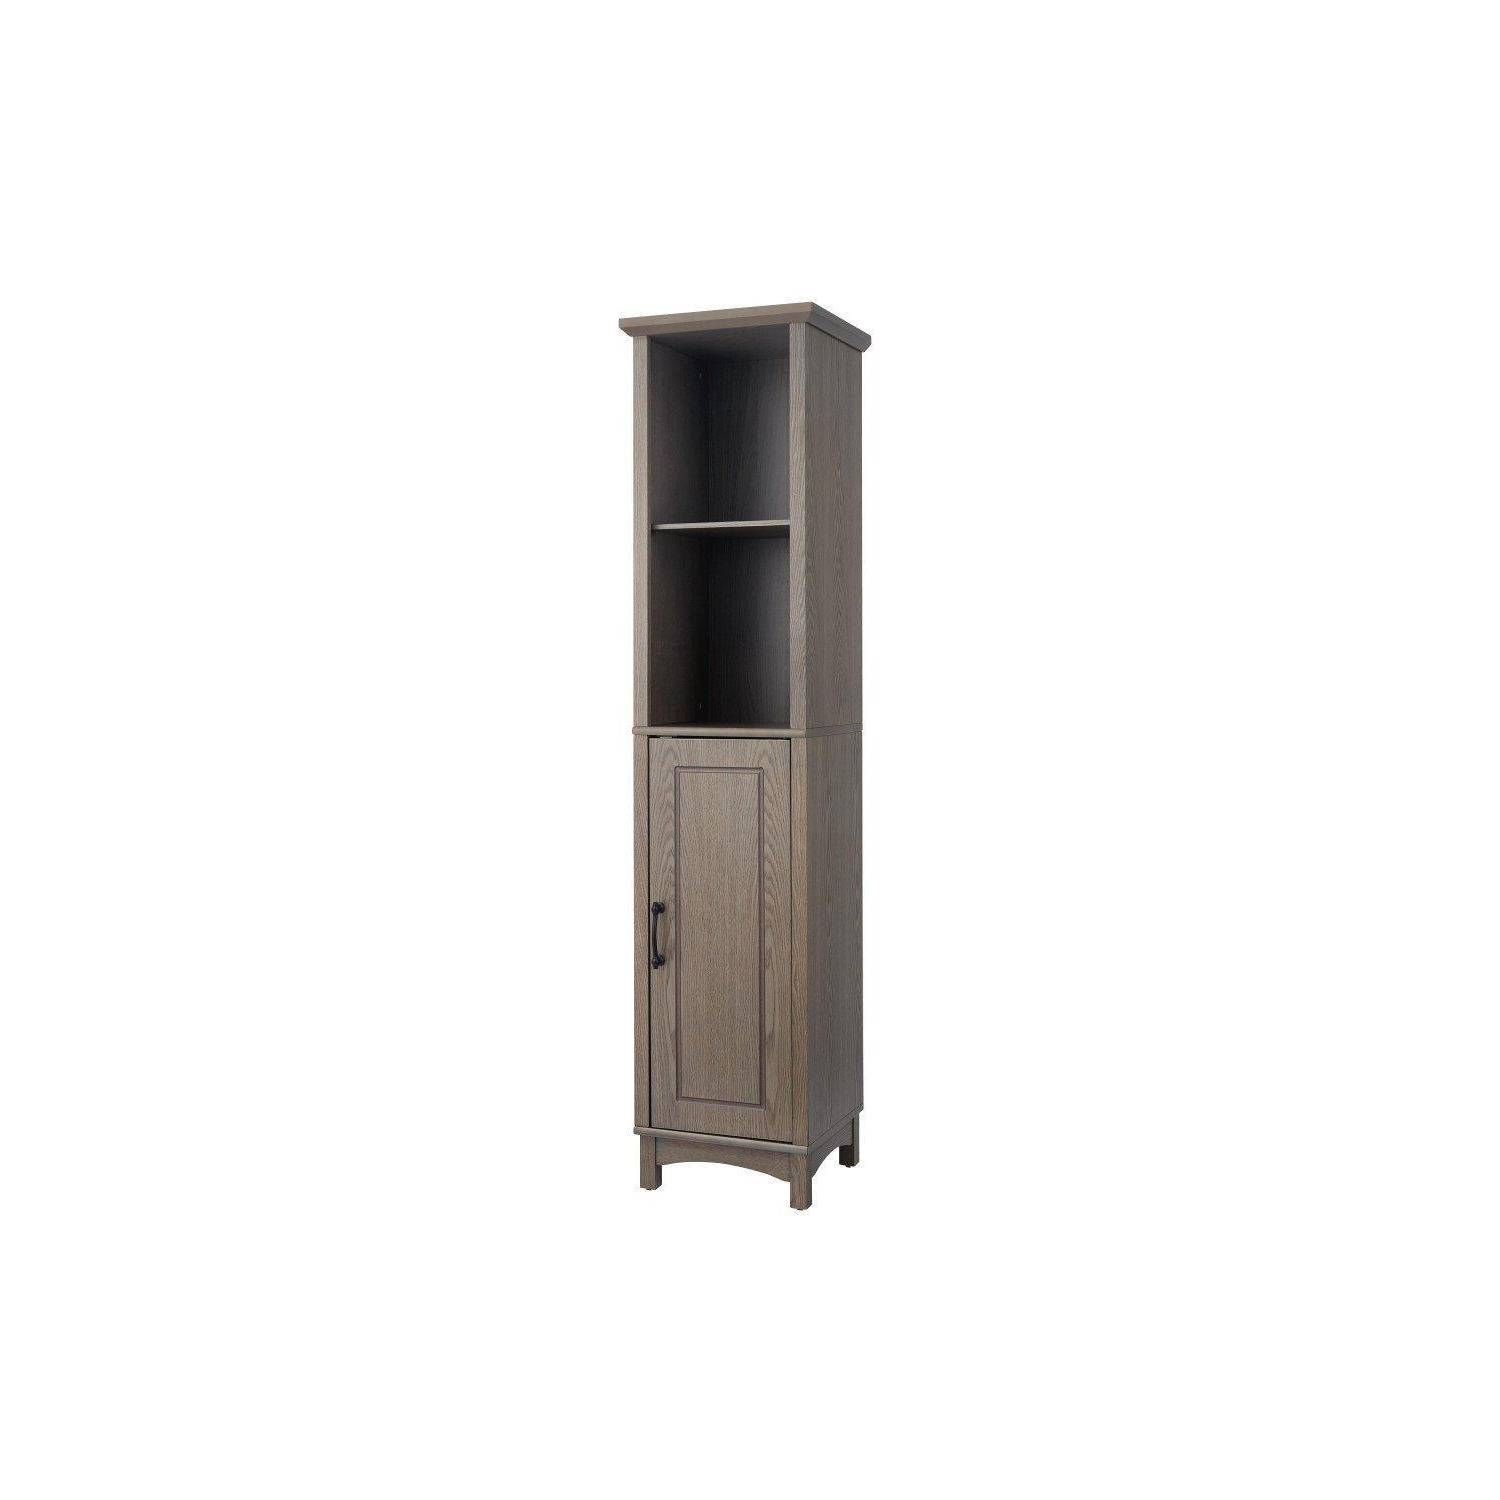 Russell Wooden Bathroom Linen Tower Storage Cabinet - image 1